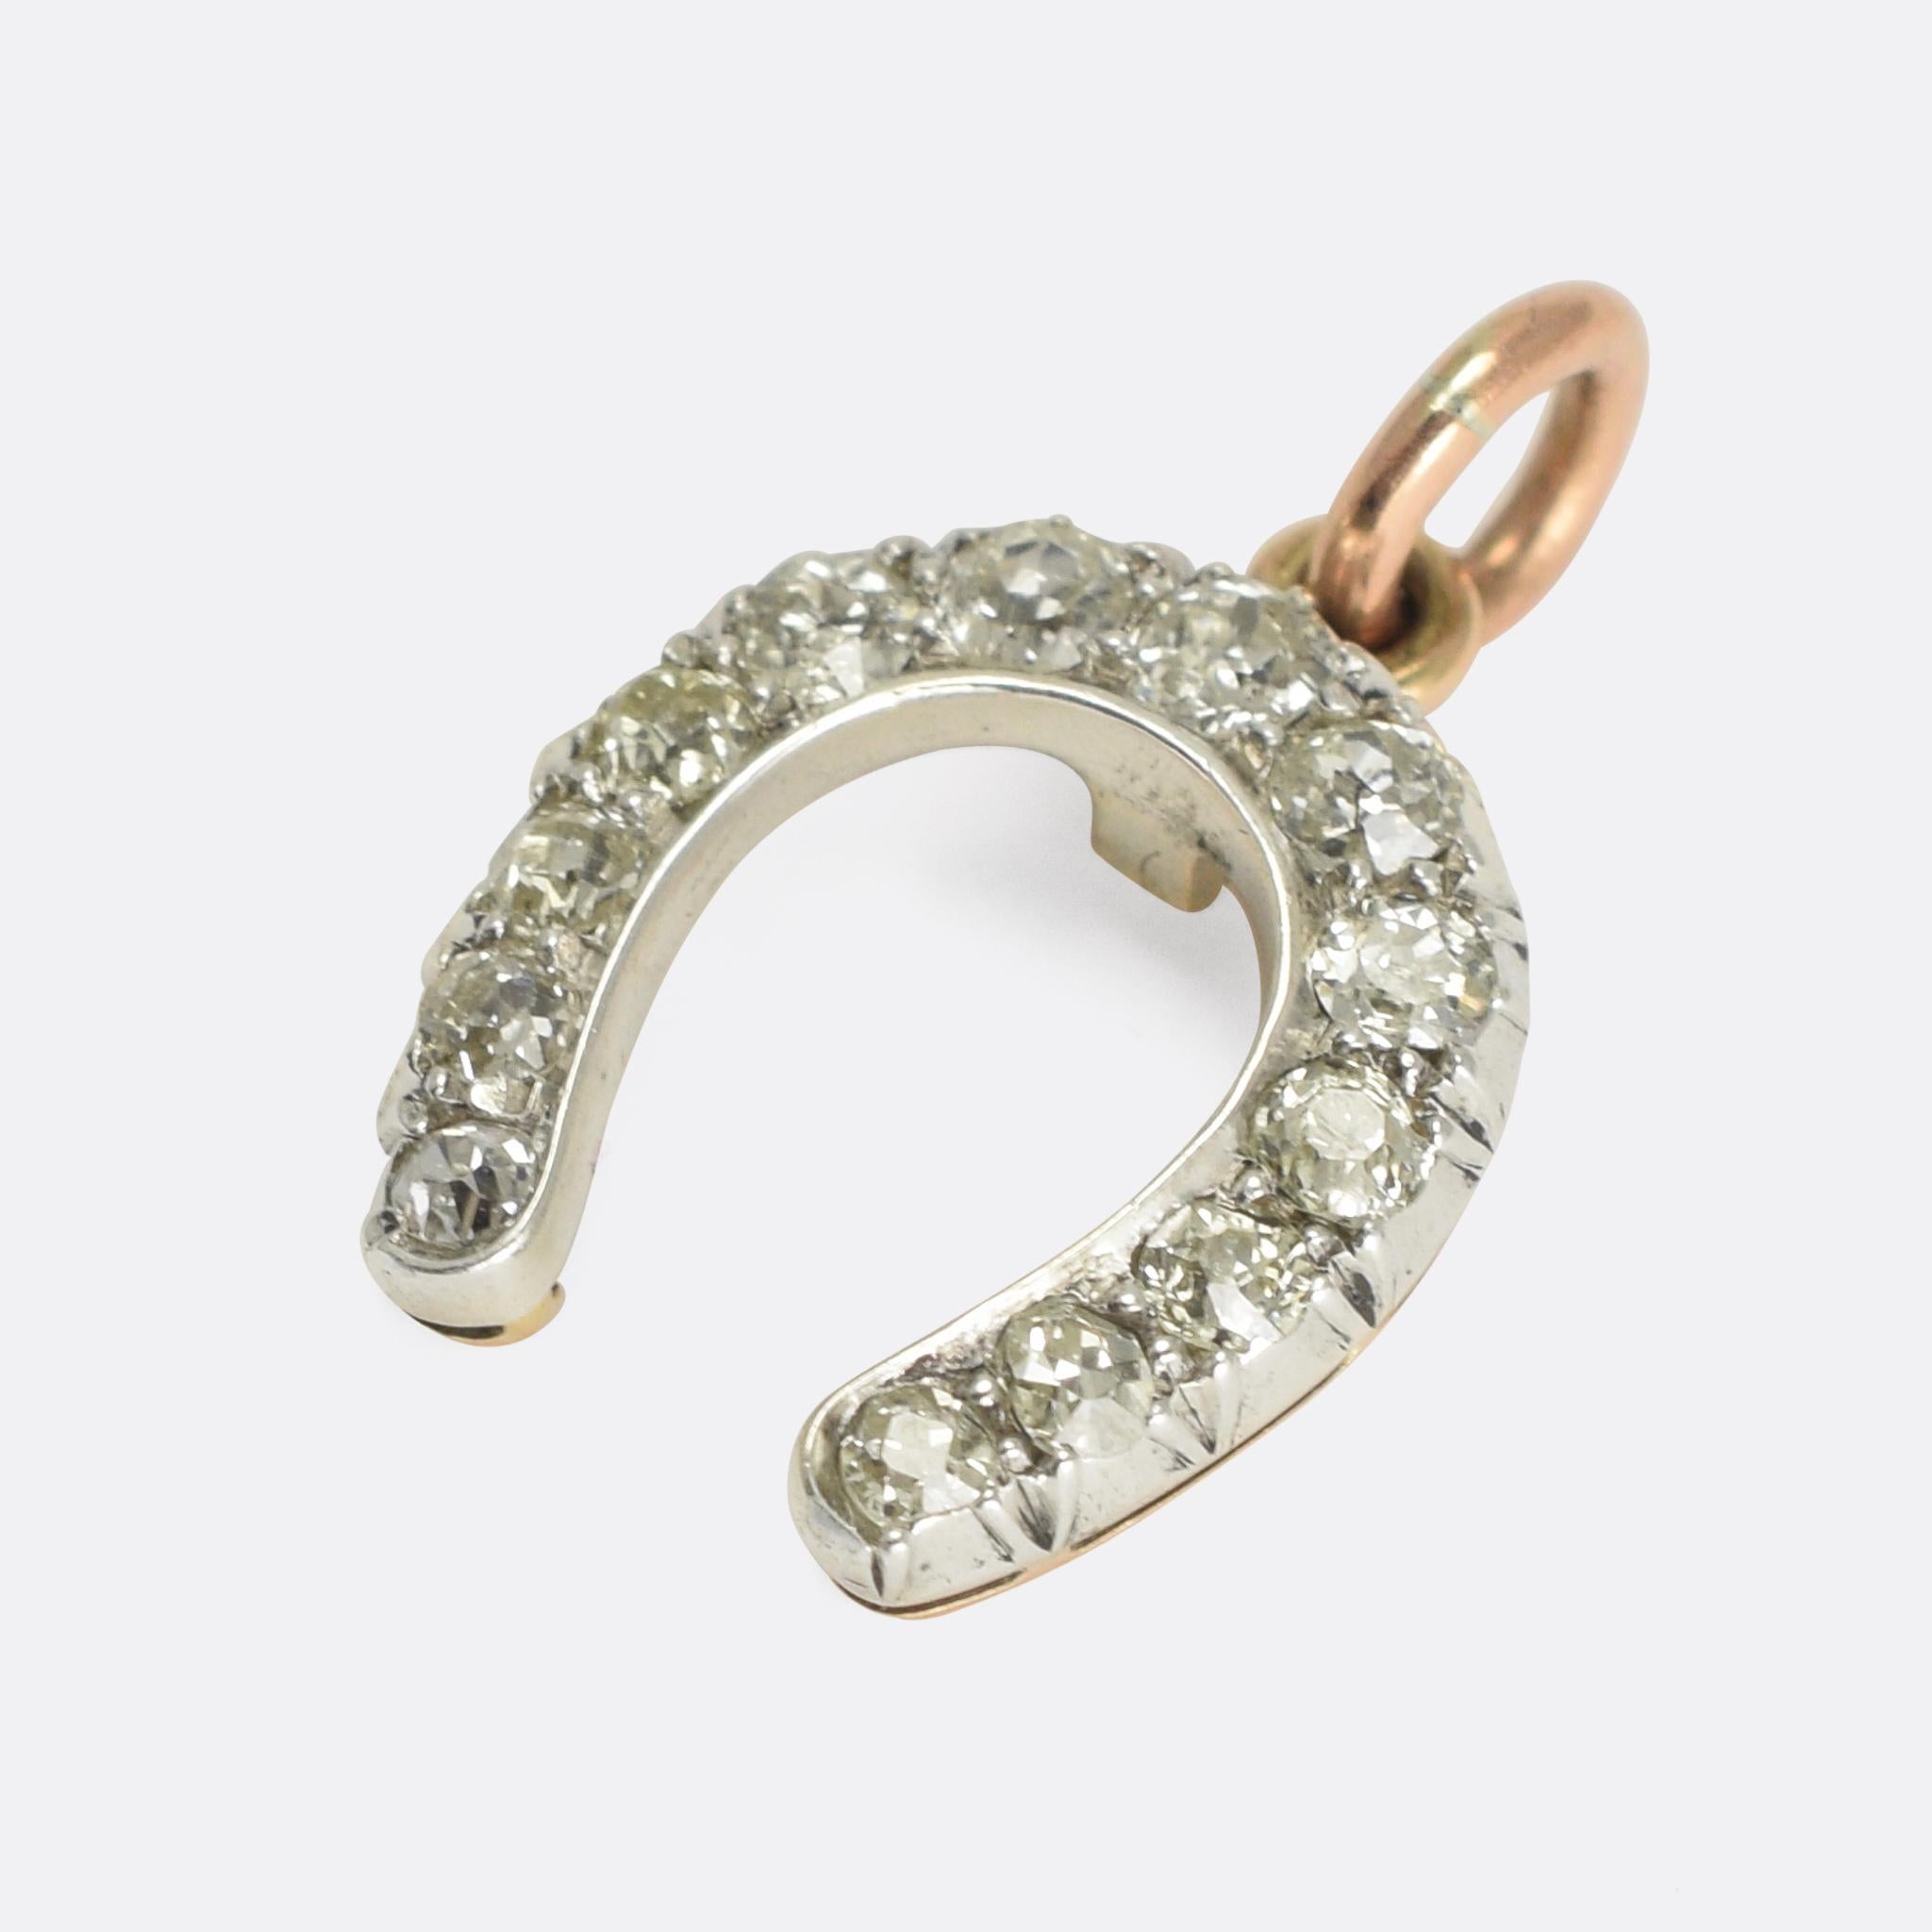 An especially lovely antique horseshoe pendant set with 13 graduated old mine cut diamonds. The stones rest in silver mounts with a 15k gold back. 

STONES 
Old mine cut diamonds

MEASUREMENTS 
1.8 x 1.4cm

WEIGHT 
2.0g

MARKS 
No marks present,